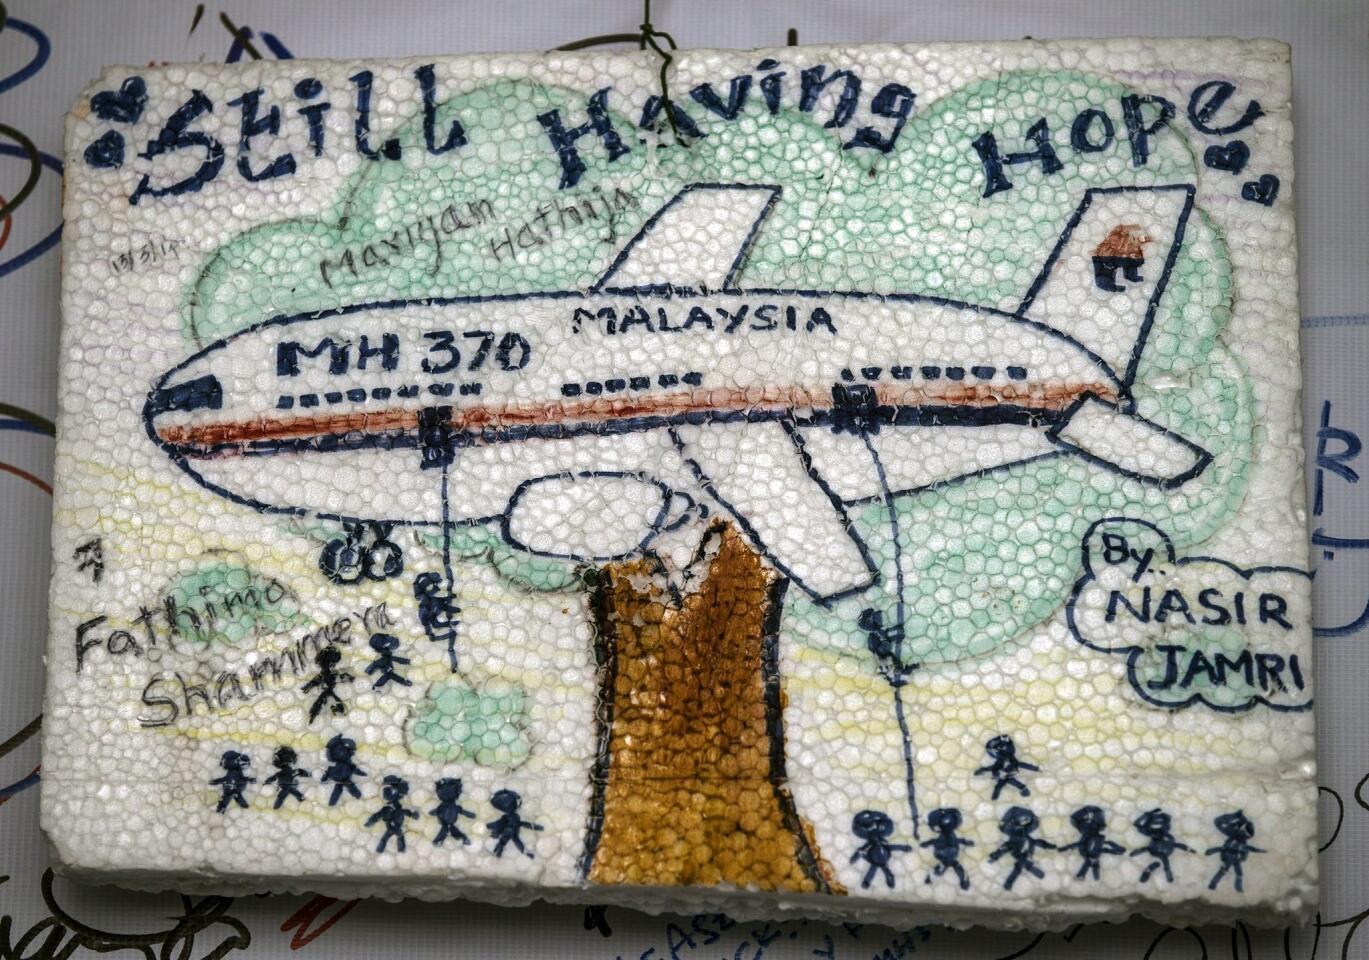 A message of support is displayed at the wall of hope for the missing passengers of the Malaysian Airlines plane at Kuala Lumpur International Airport viewing gallery, Malaysia, 18 March 2014.